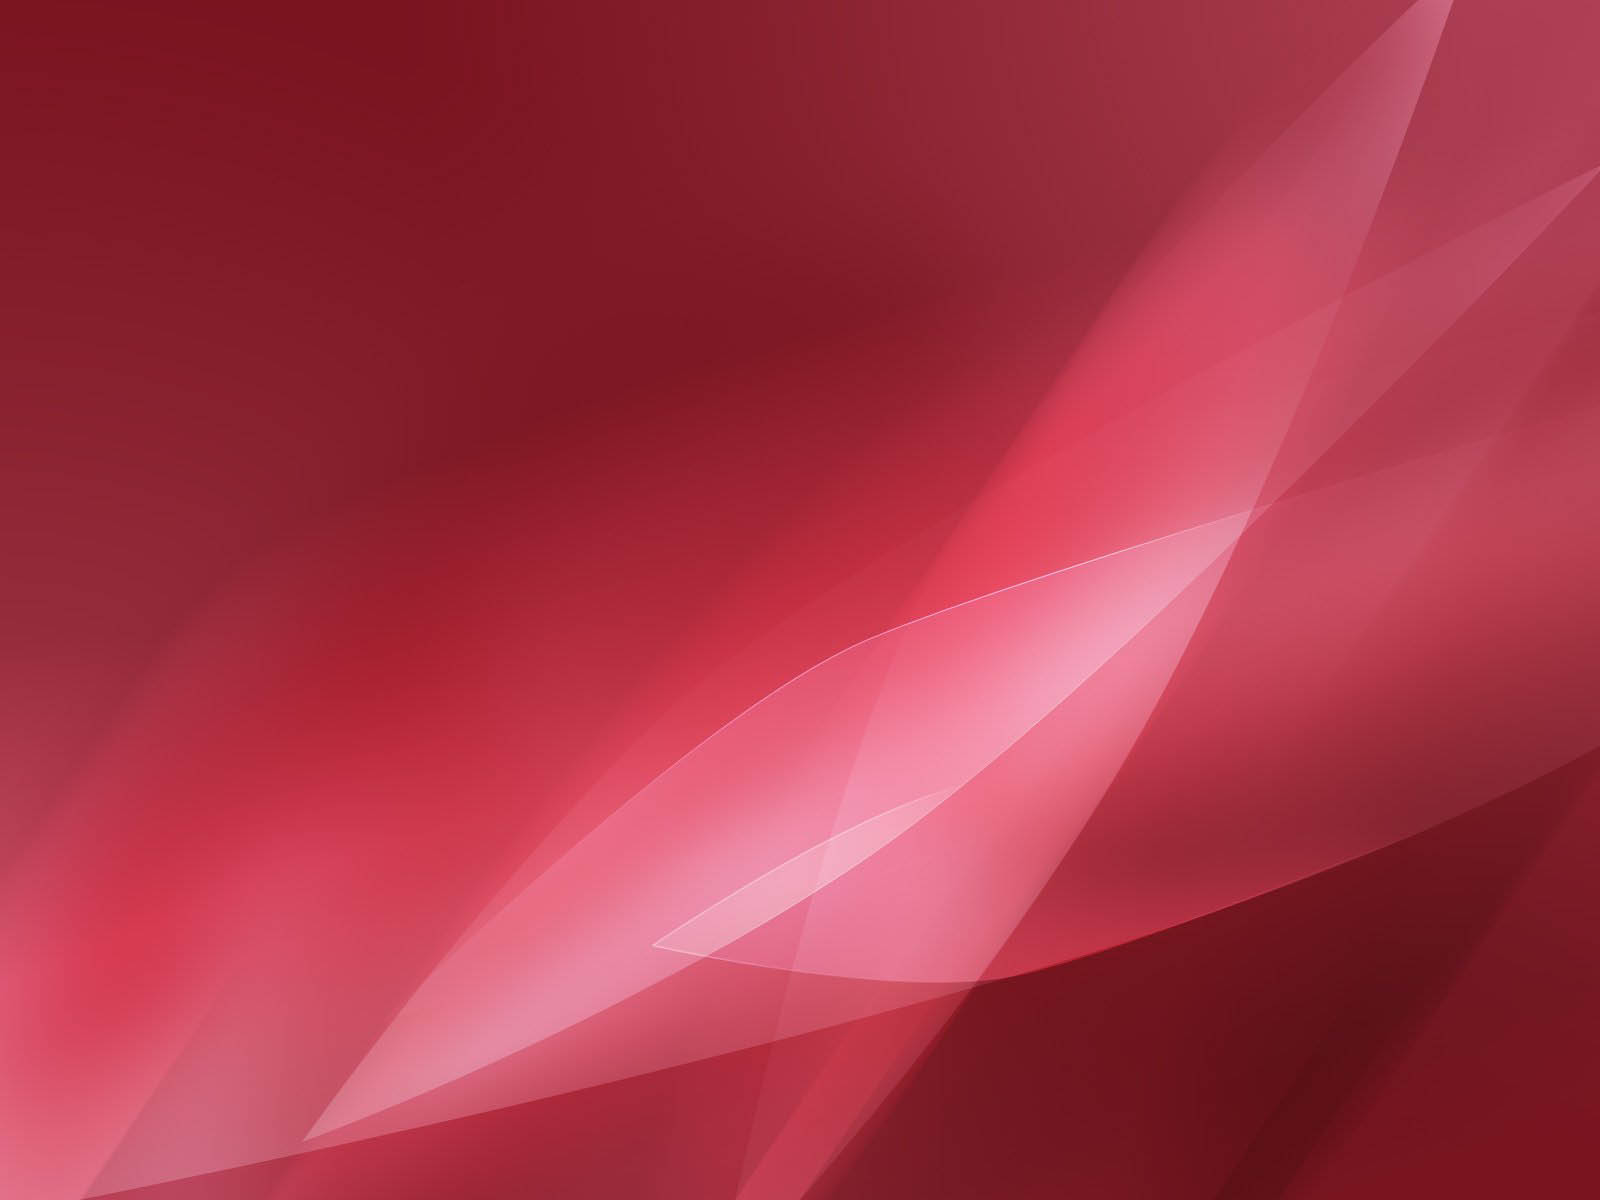 Tag Abstract Red Wallpaper Background Paos Pictures And Image